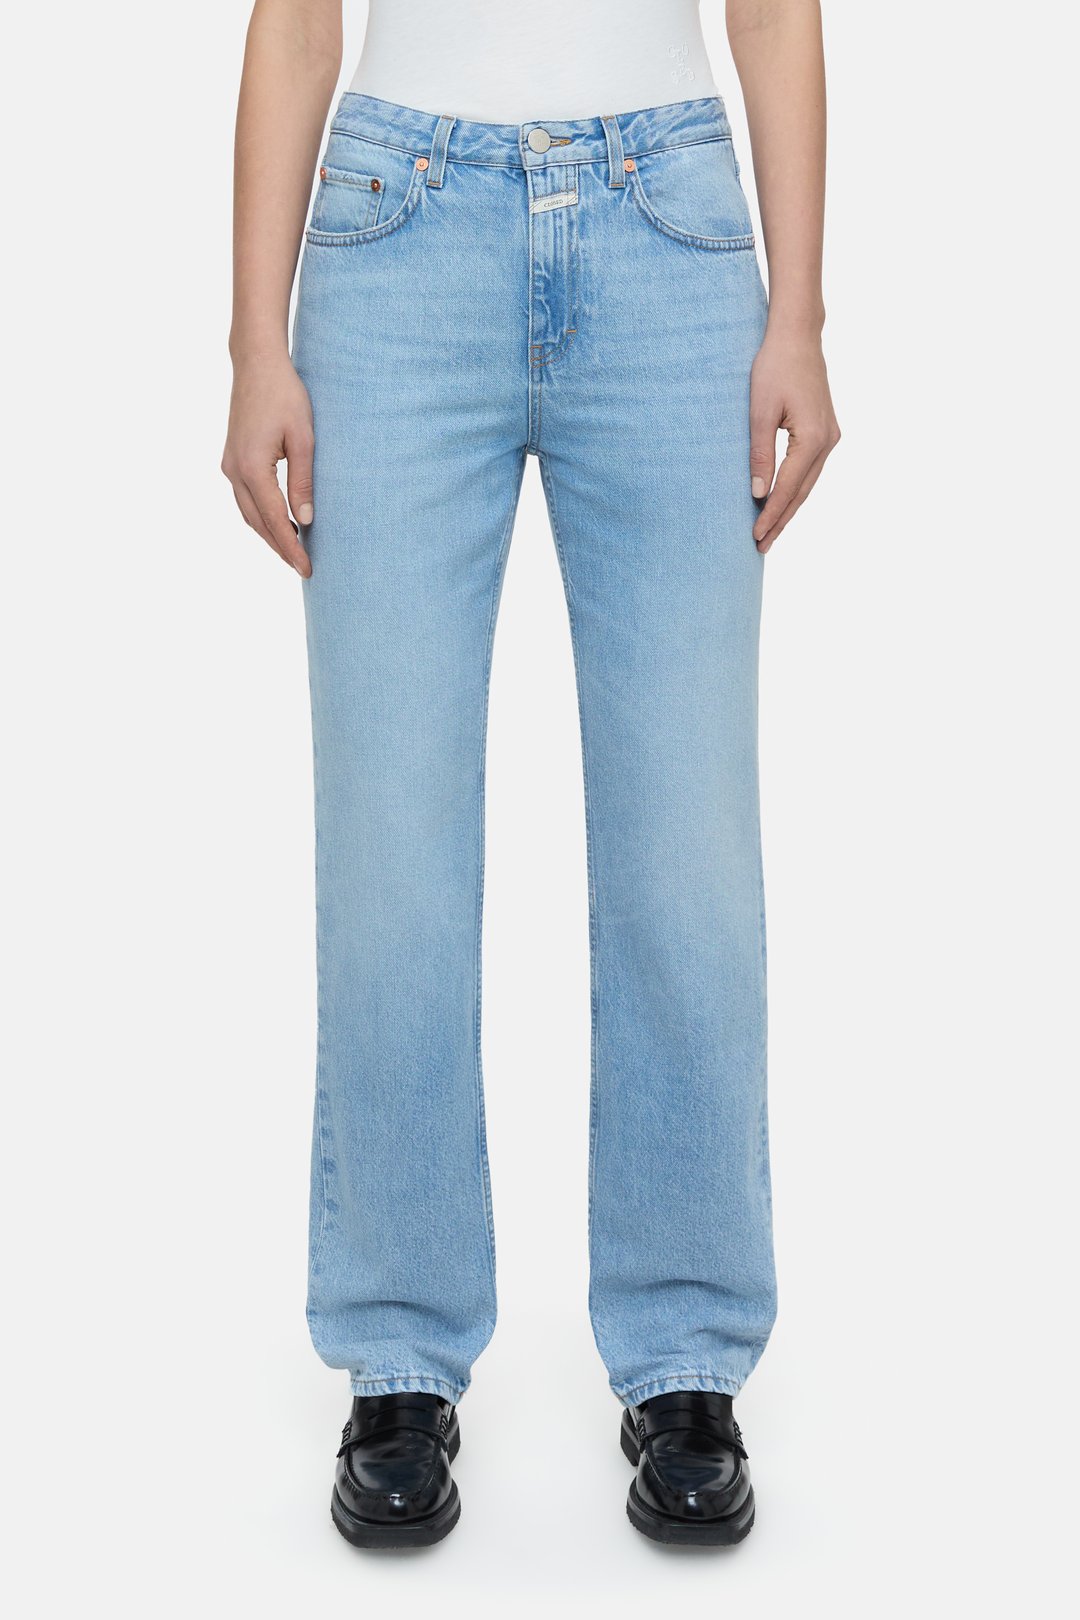 Jeans coton style roan ligth blue CLOSED